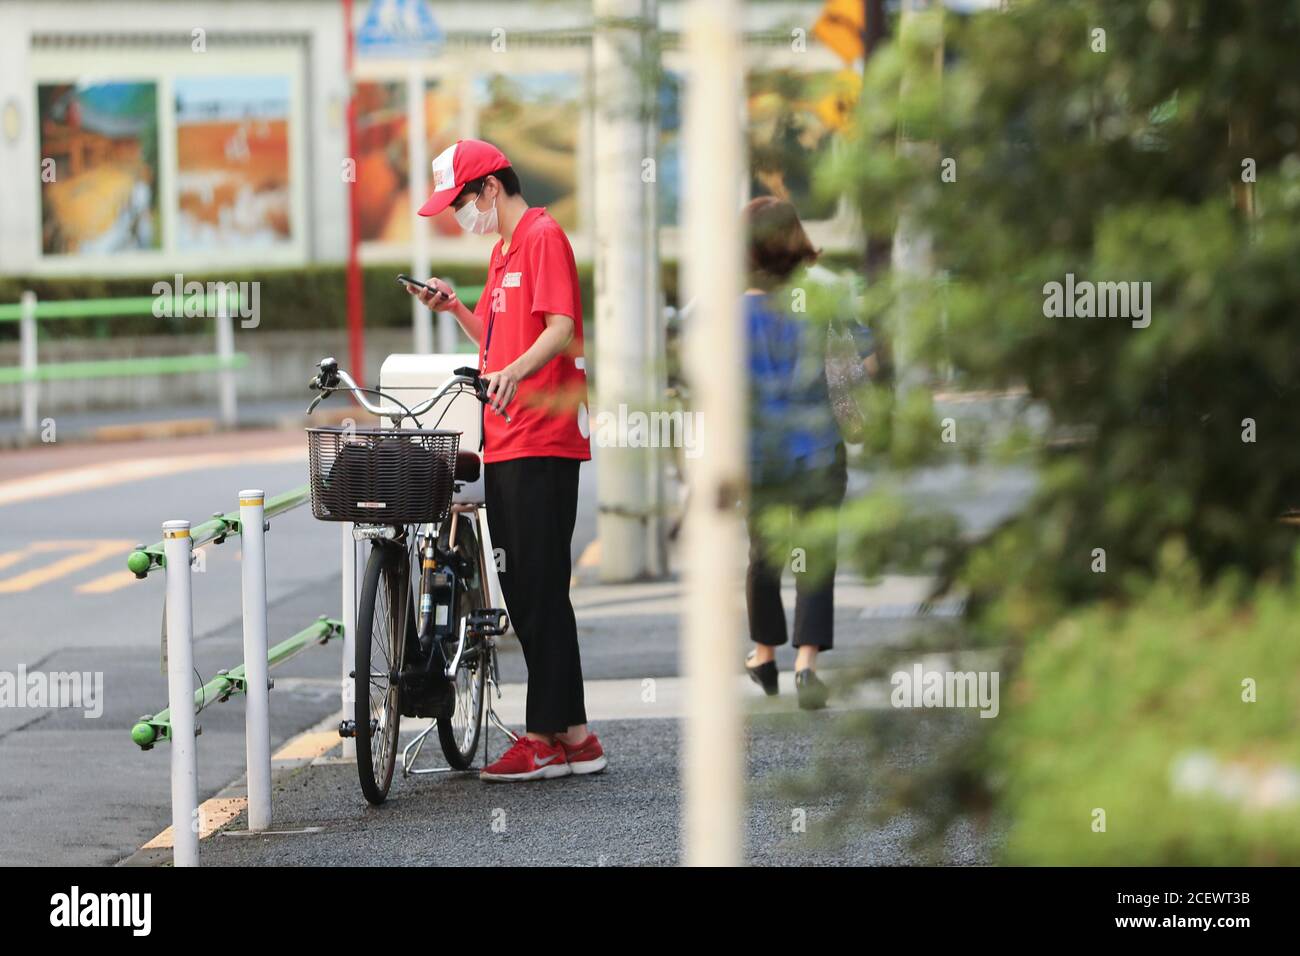 Tokyo, Japan. 2nd Sep, 2020. A take-away deliveryman checks the order information on a cellphone in Tokyo, Japan, Sept. 2, 2020. Japan on Wednesday reported 592 new coronavirus cases, dropping from 633 new infections confirmed the previous day and bringing the nation's cumulative COVID-19 tally to 69,743, not including those related to a cruise ship quarantined in Yokohama near Tokyo earlier in the year. Credit: Du Xiaoyi/Xinhua/Alamy Live News Stock Photo